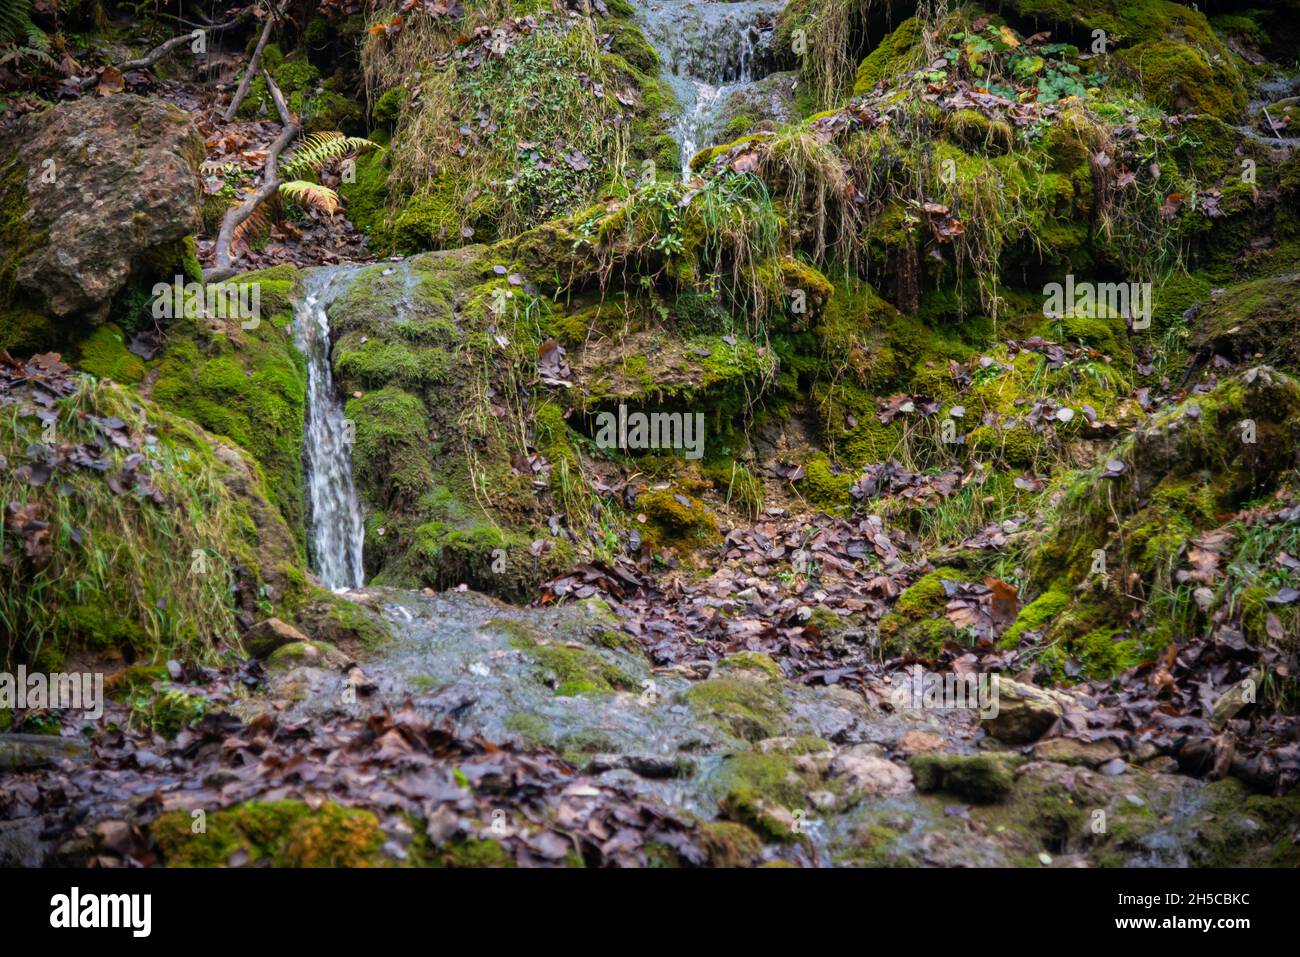 sandy rock along which flows a clear forest spring water forming a waterfall. Stones with green moss. Stock Photo